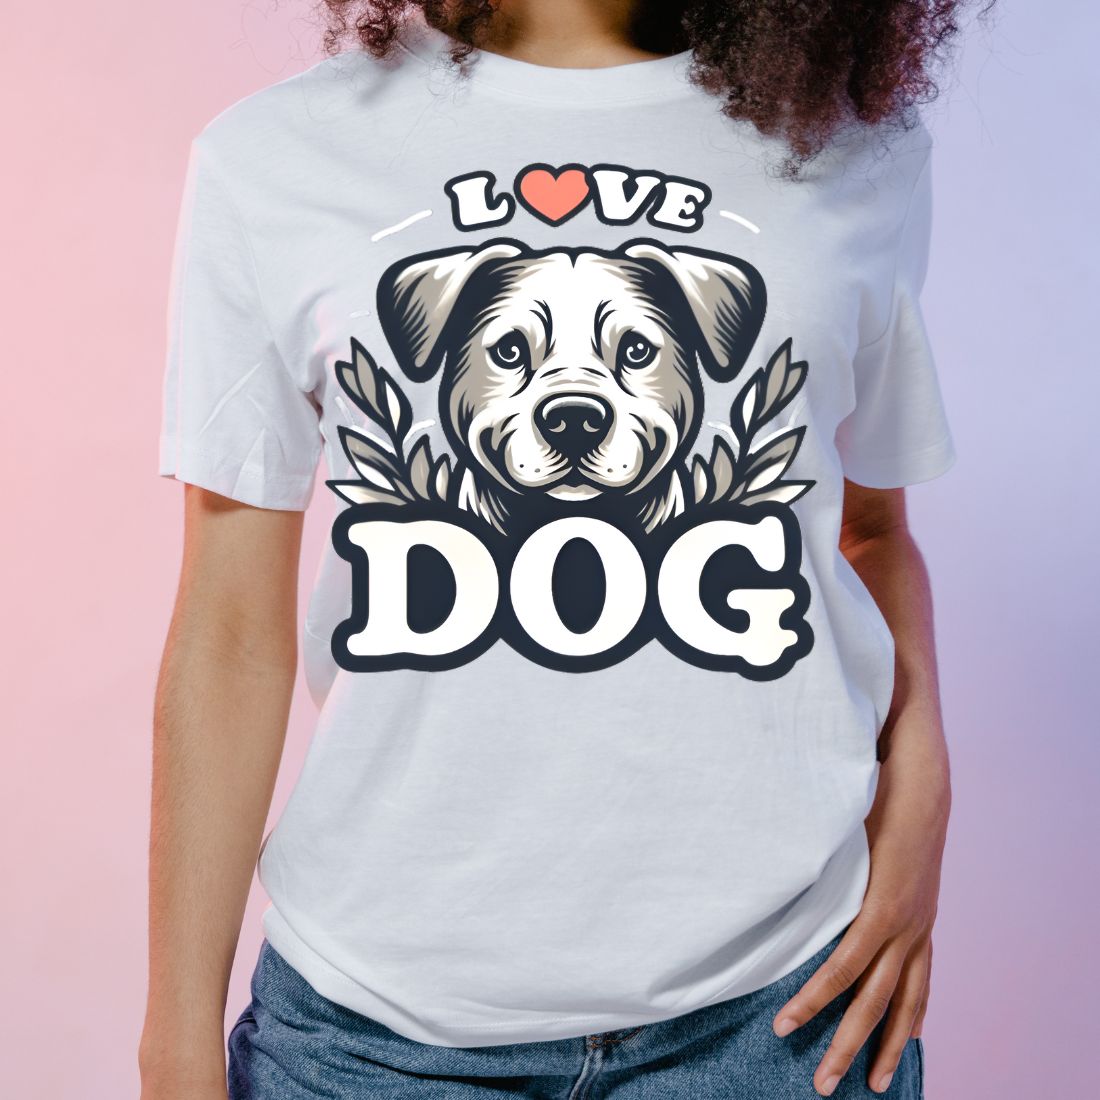 Cute design for dogs lovers preview image.